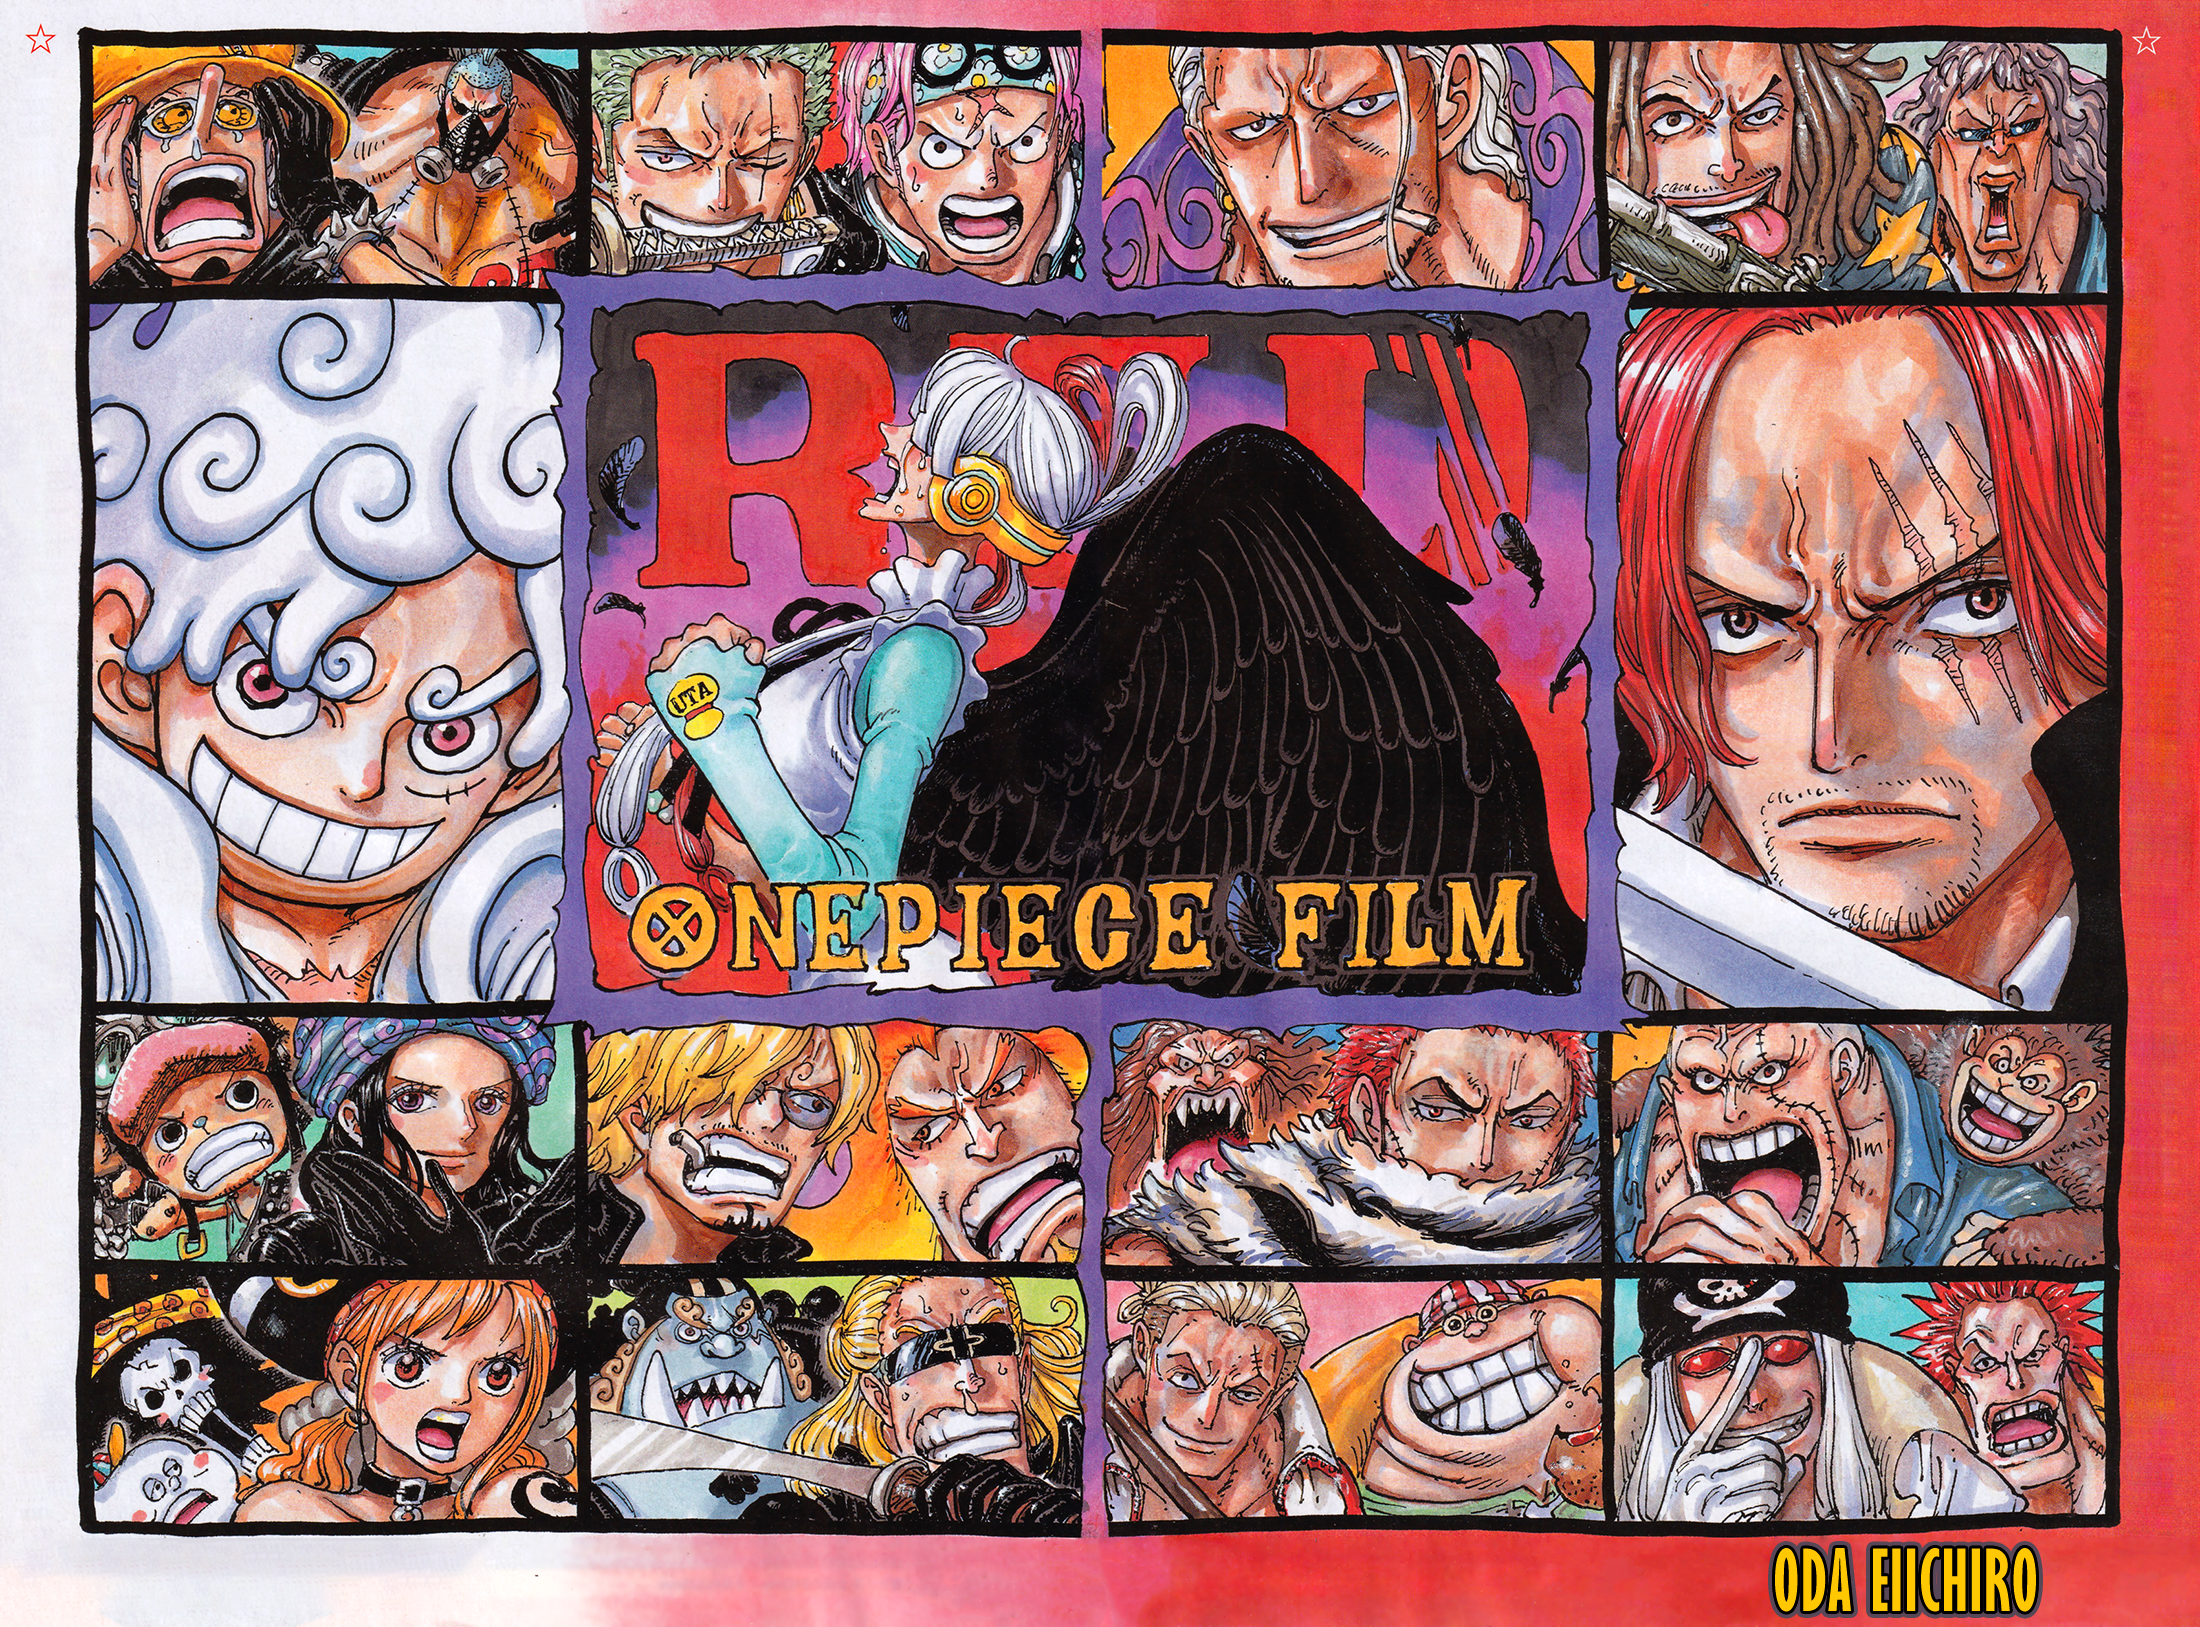 One Piece, Chapter 1105  TcbScans Org - Free Manga Online in High Quality